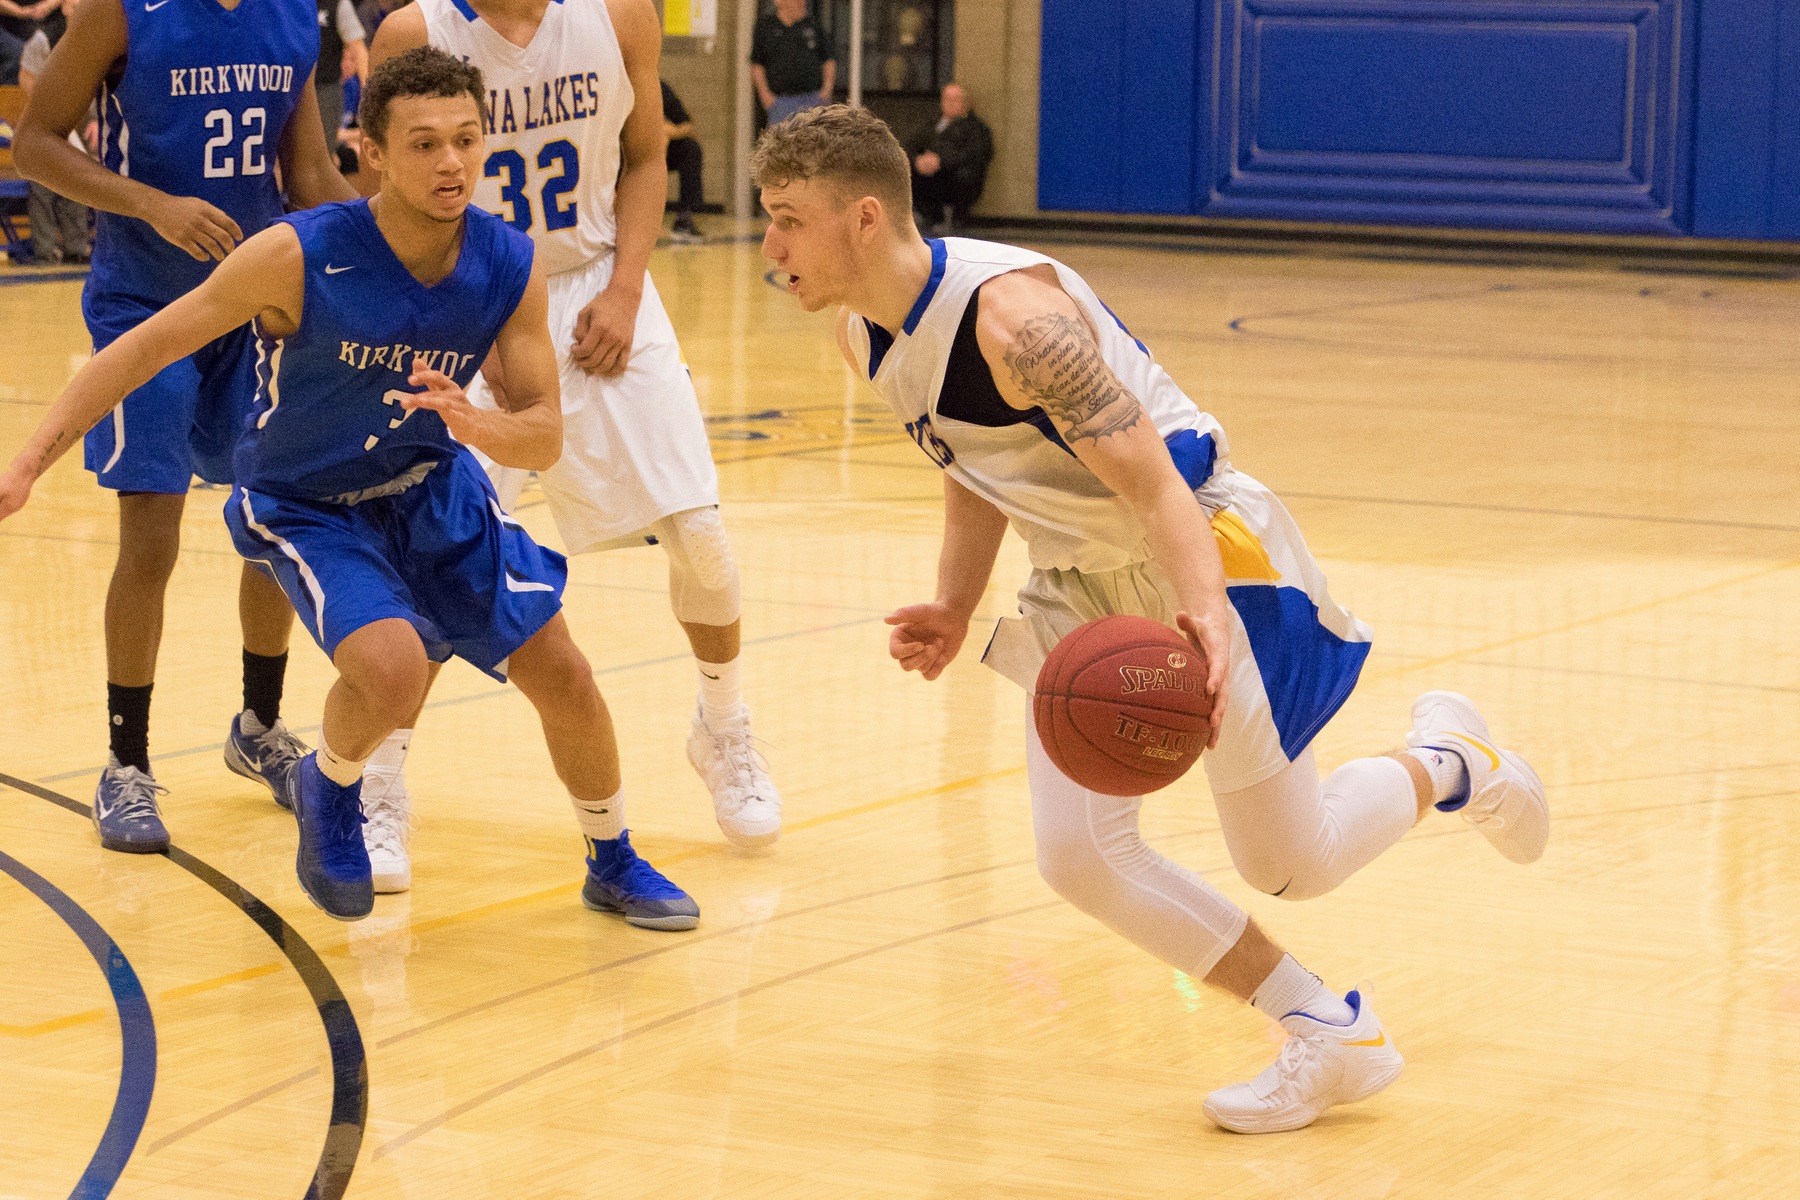 Lakers beat NIACC 79-72